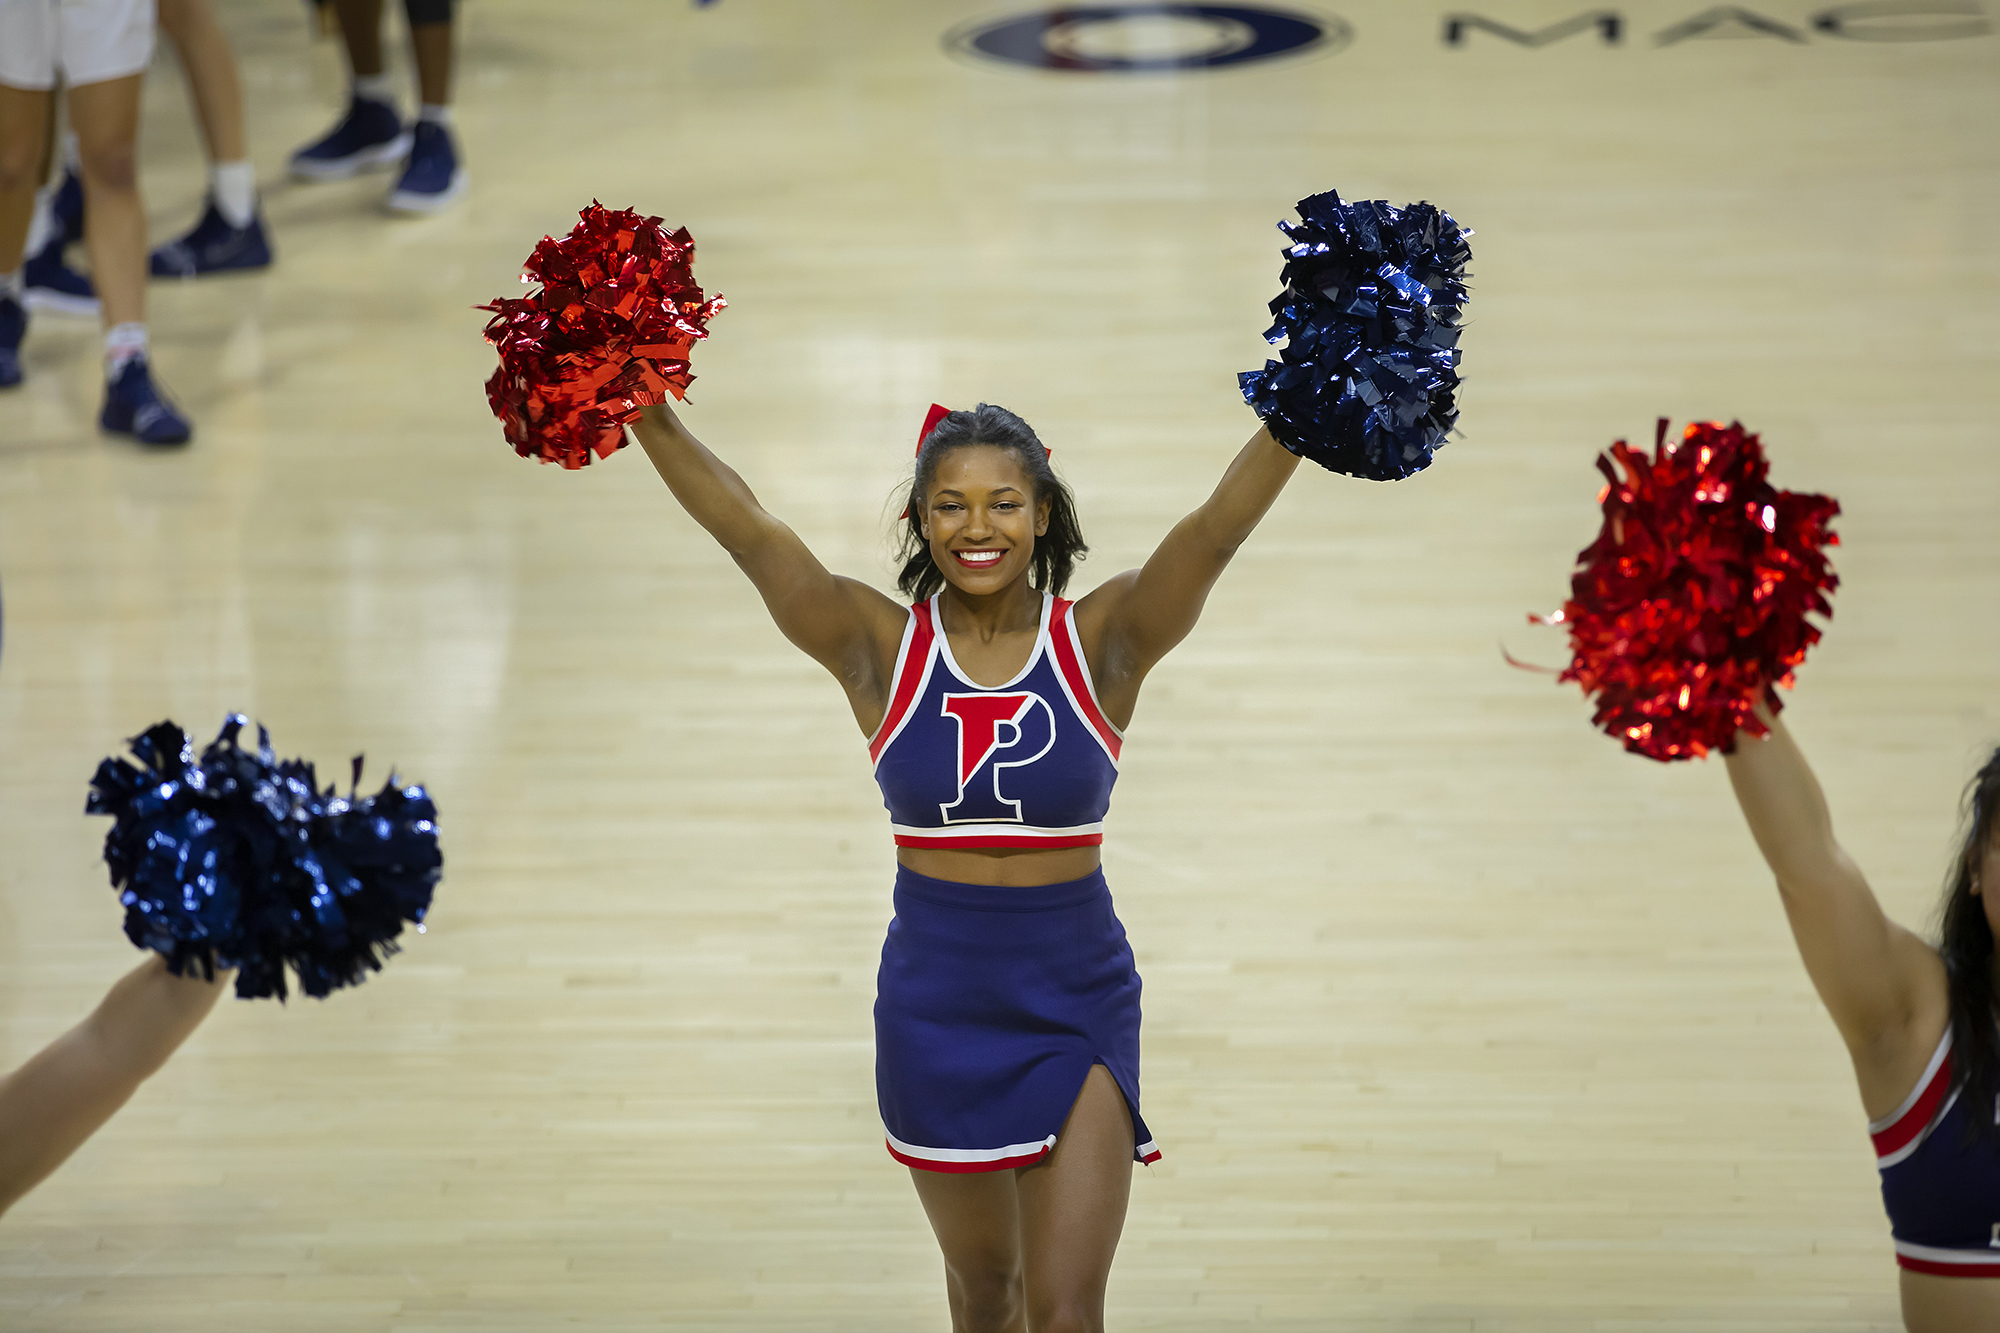 Maya Moore cheers with her pom-poms on the basketball court with her fellow cheerleaders.